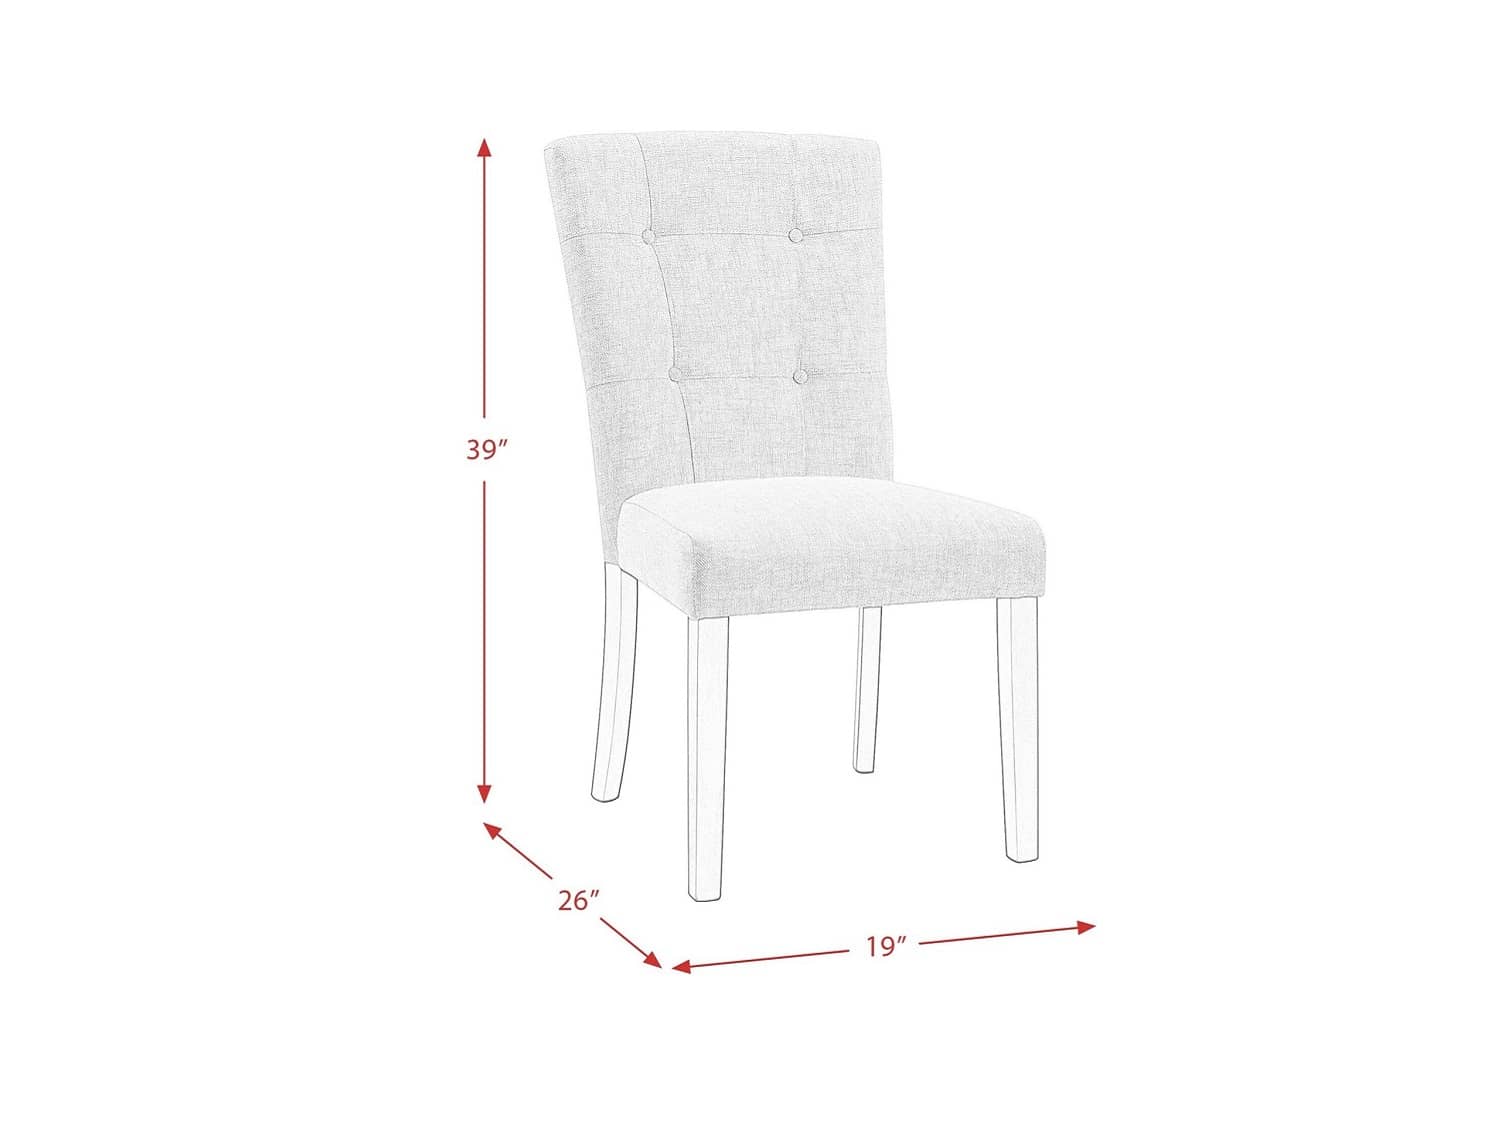 EPPINGTON Dining Chair - Dimensions